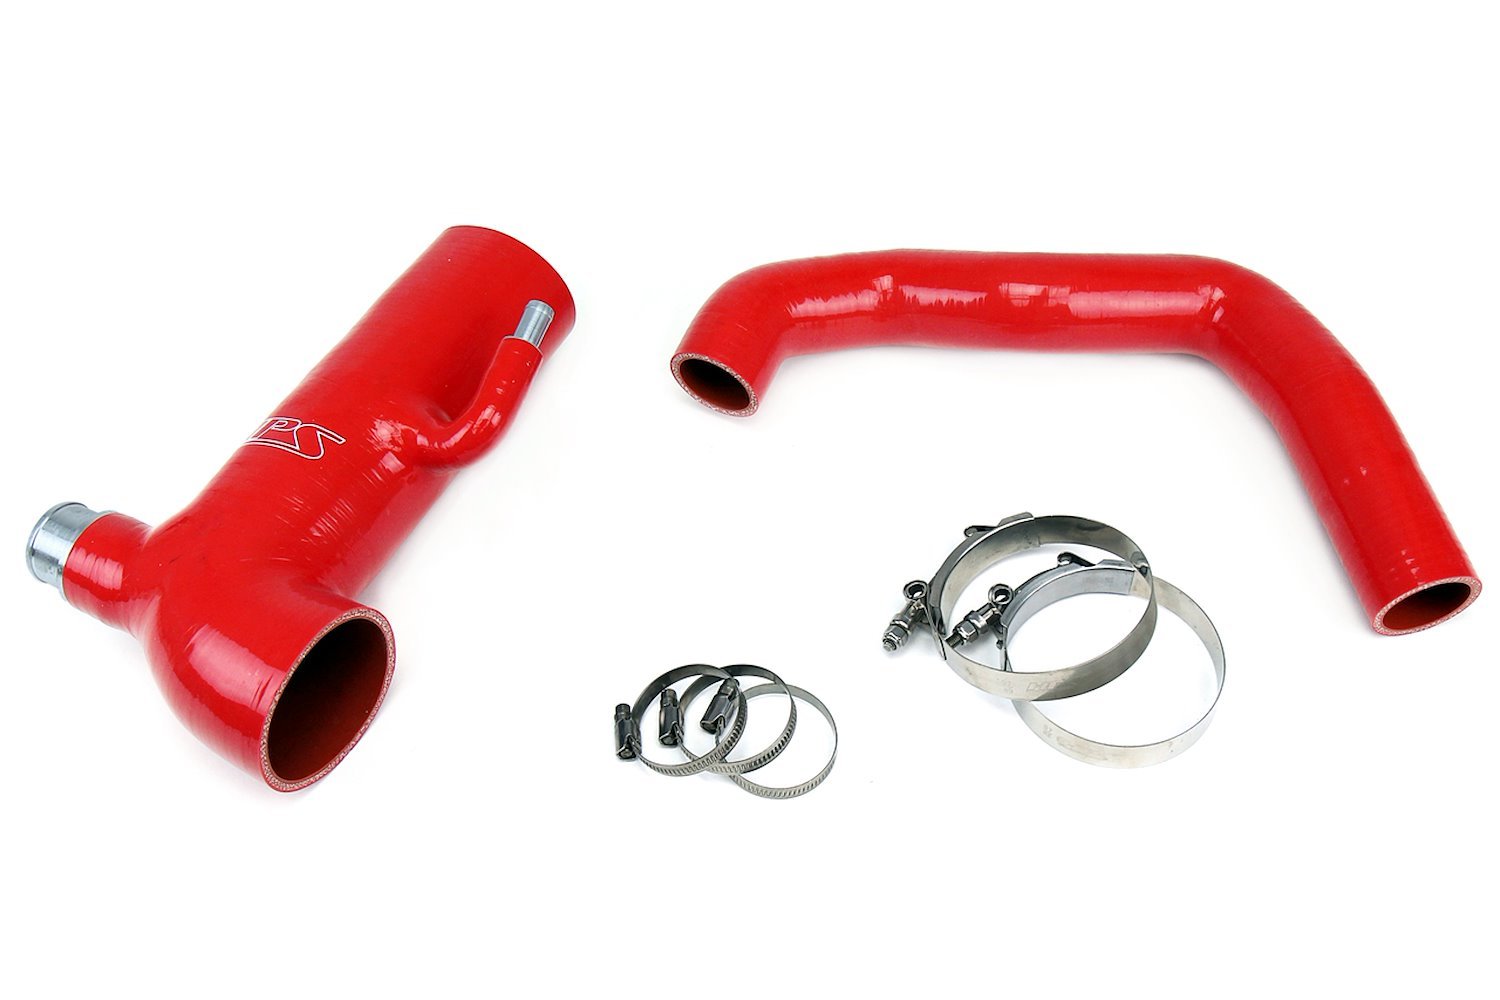 57-1293-RED Silicone Air Intake, Dyno Proven +1.4 HP, +1.2 TQ, High Air Flow, Better Throttle Response